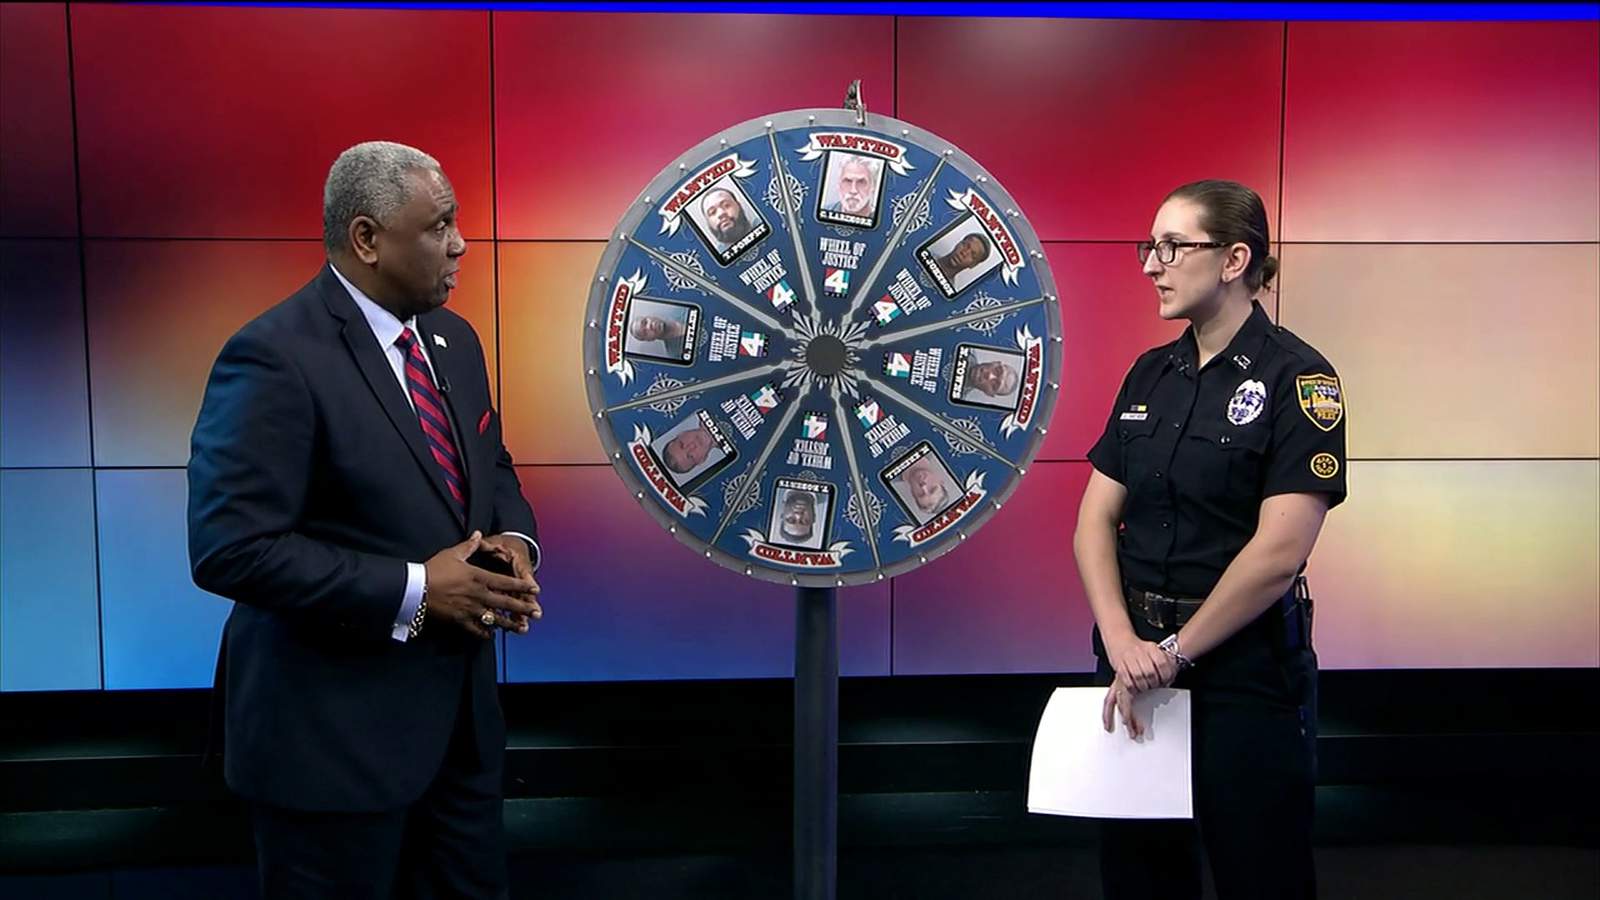 Chester Larimore and Trey Pompey Wanted on Today's Wheel of Justice